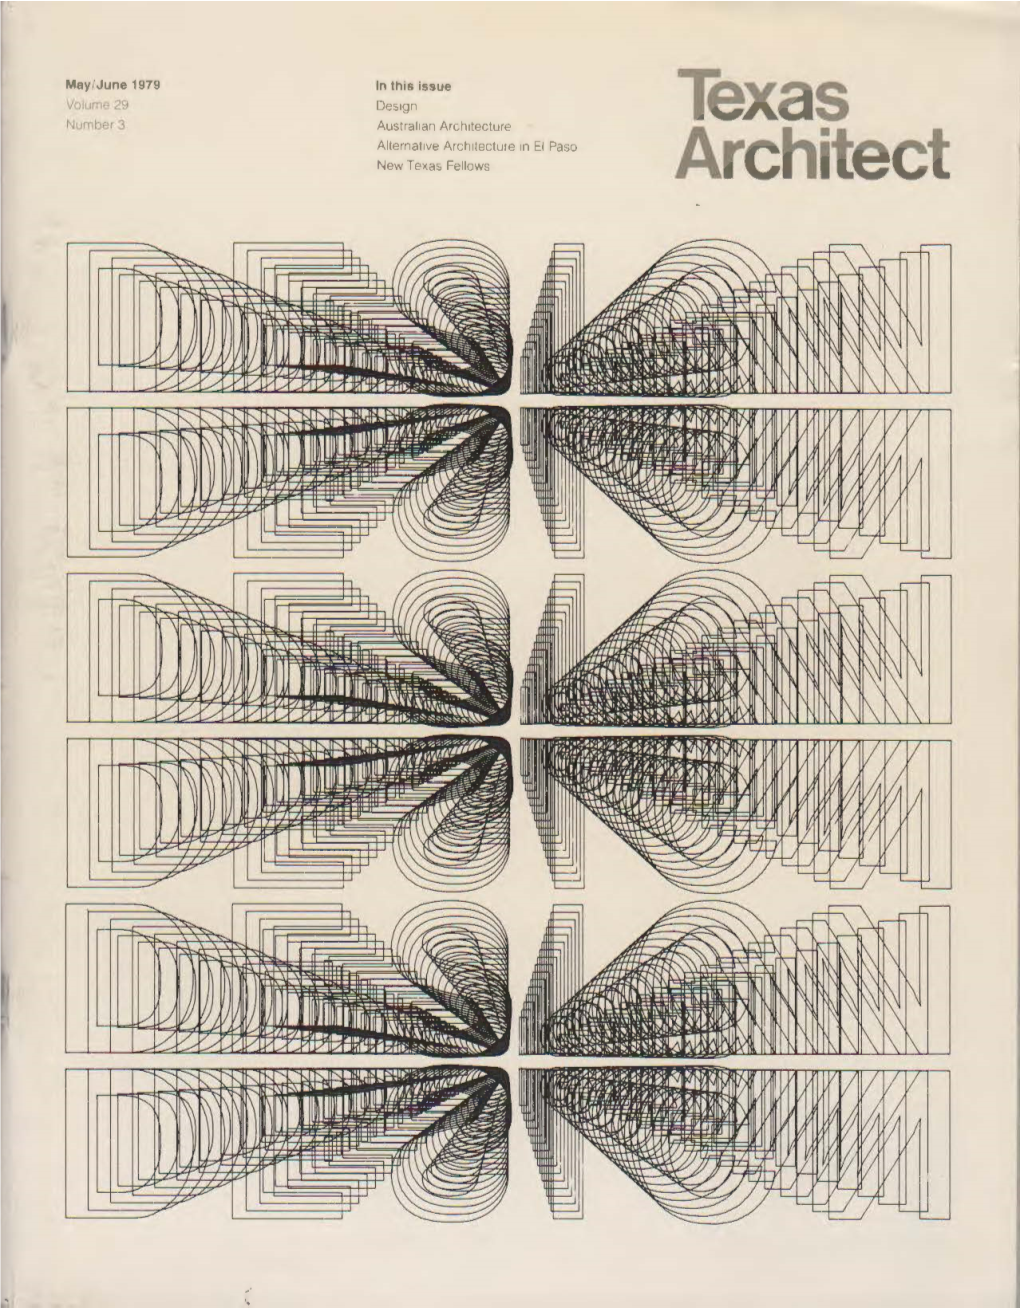 Texas Architect Is the Official Publication of the Texas Society of Architects